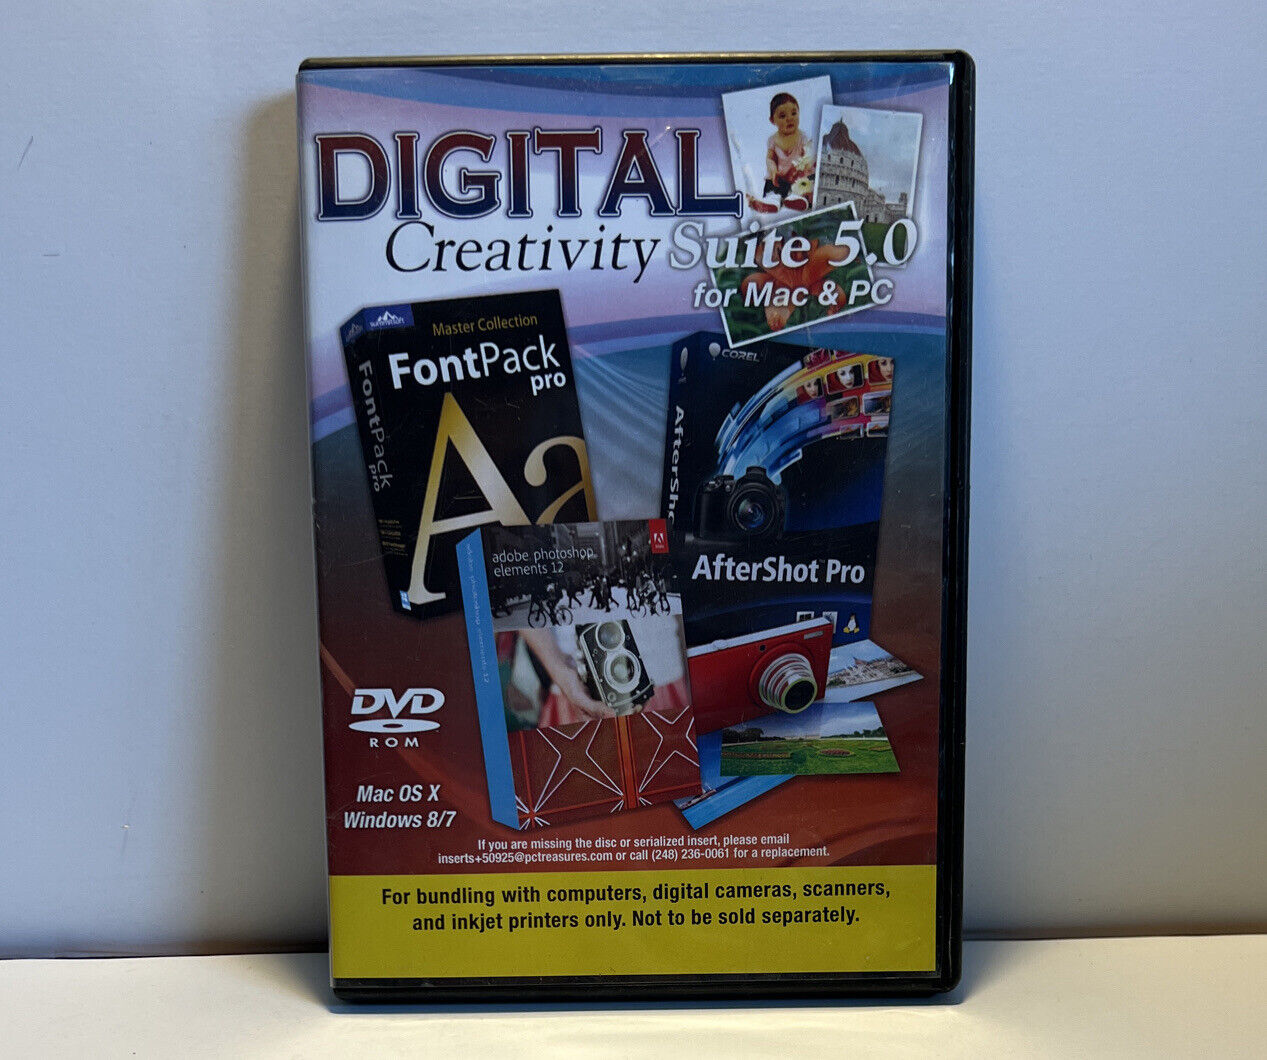 Digital Creativity Suite 5.0 for Mac & PC - DVD Rom with keys